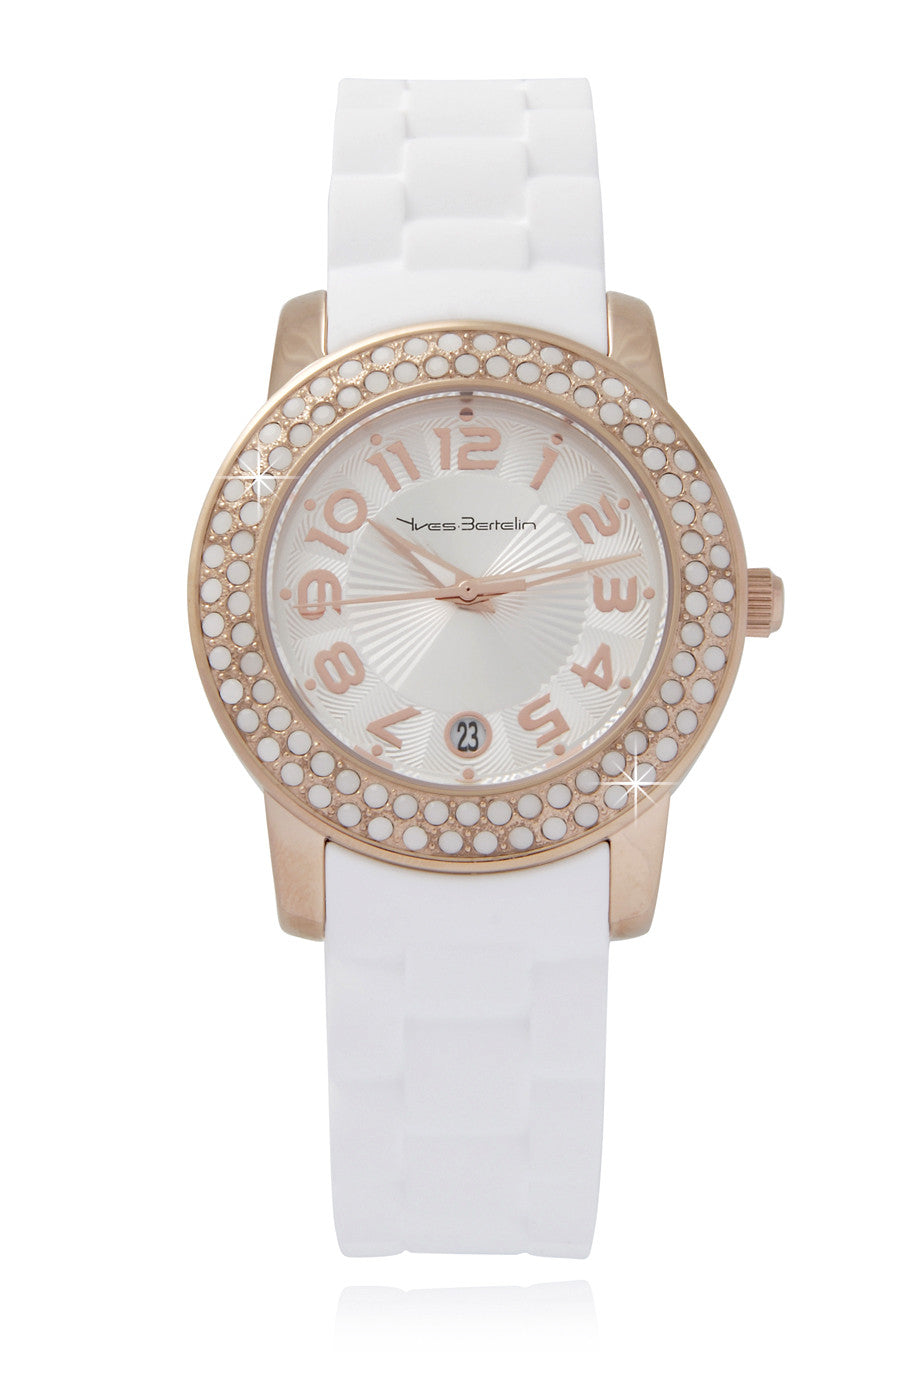 DATE Rose Gold White Crystal Watch